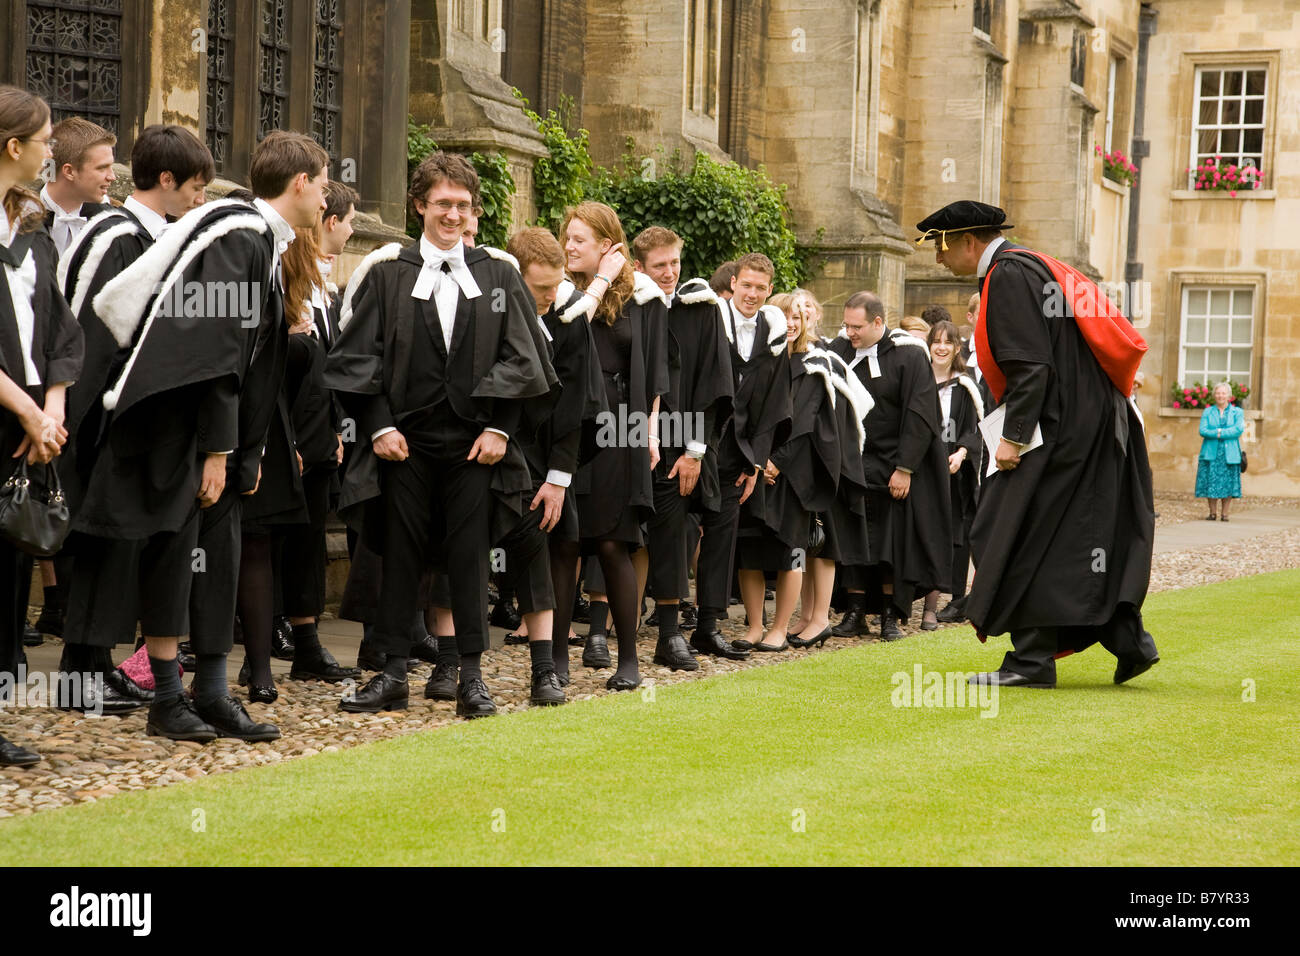 Non pattern, unpattered, black or very dark socks must be worn by Graduands on graduation day, College Master makes a final check Stock Photo